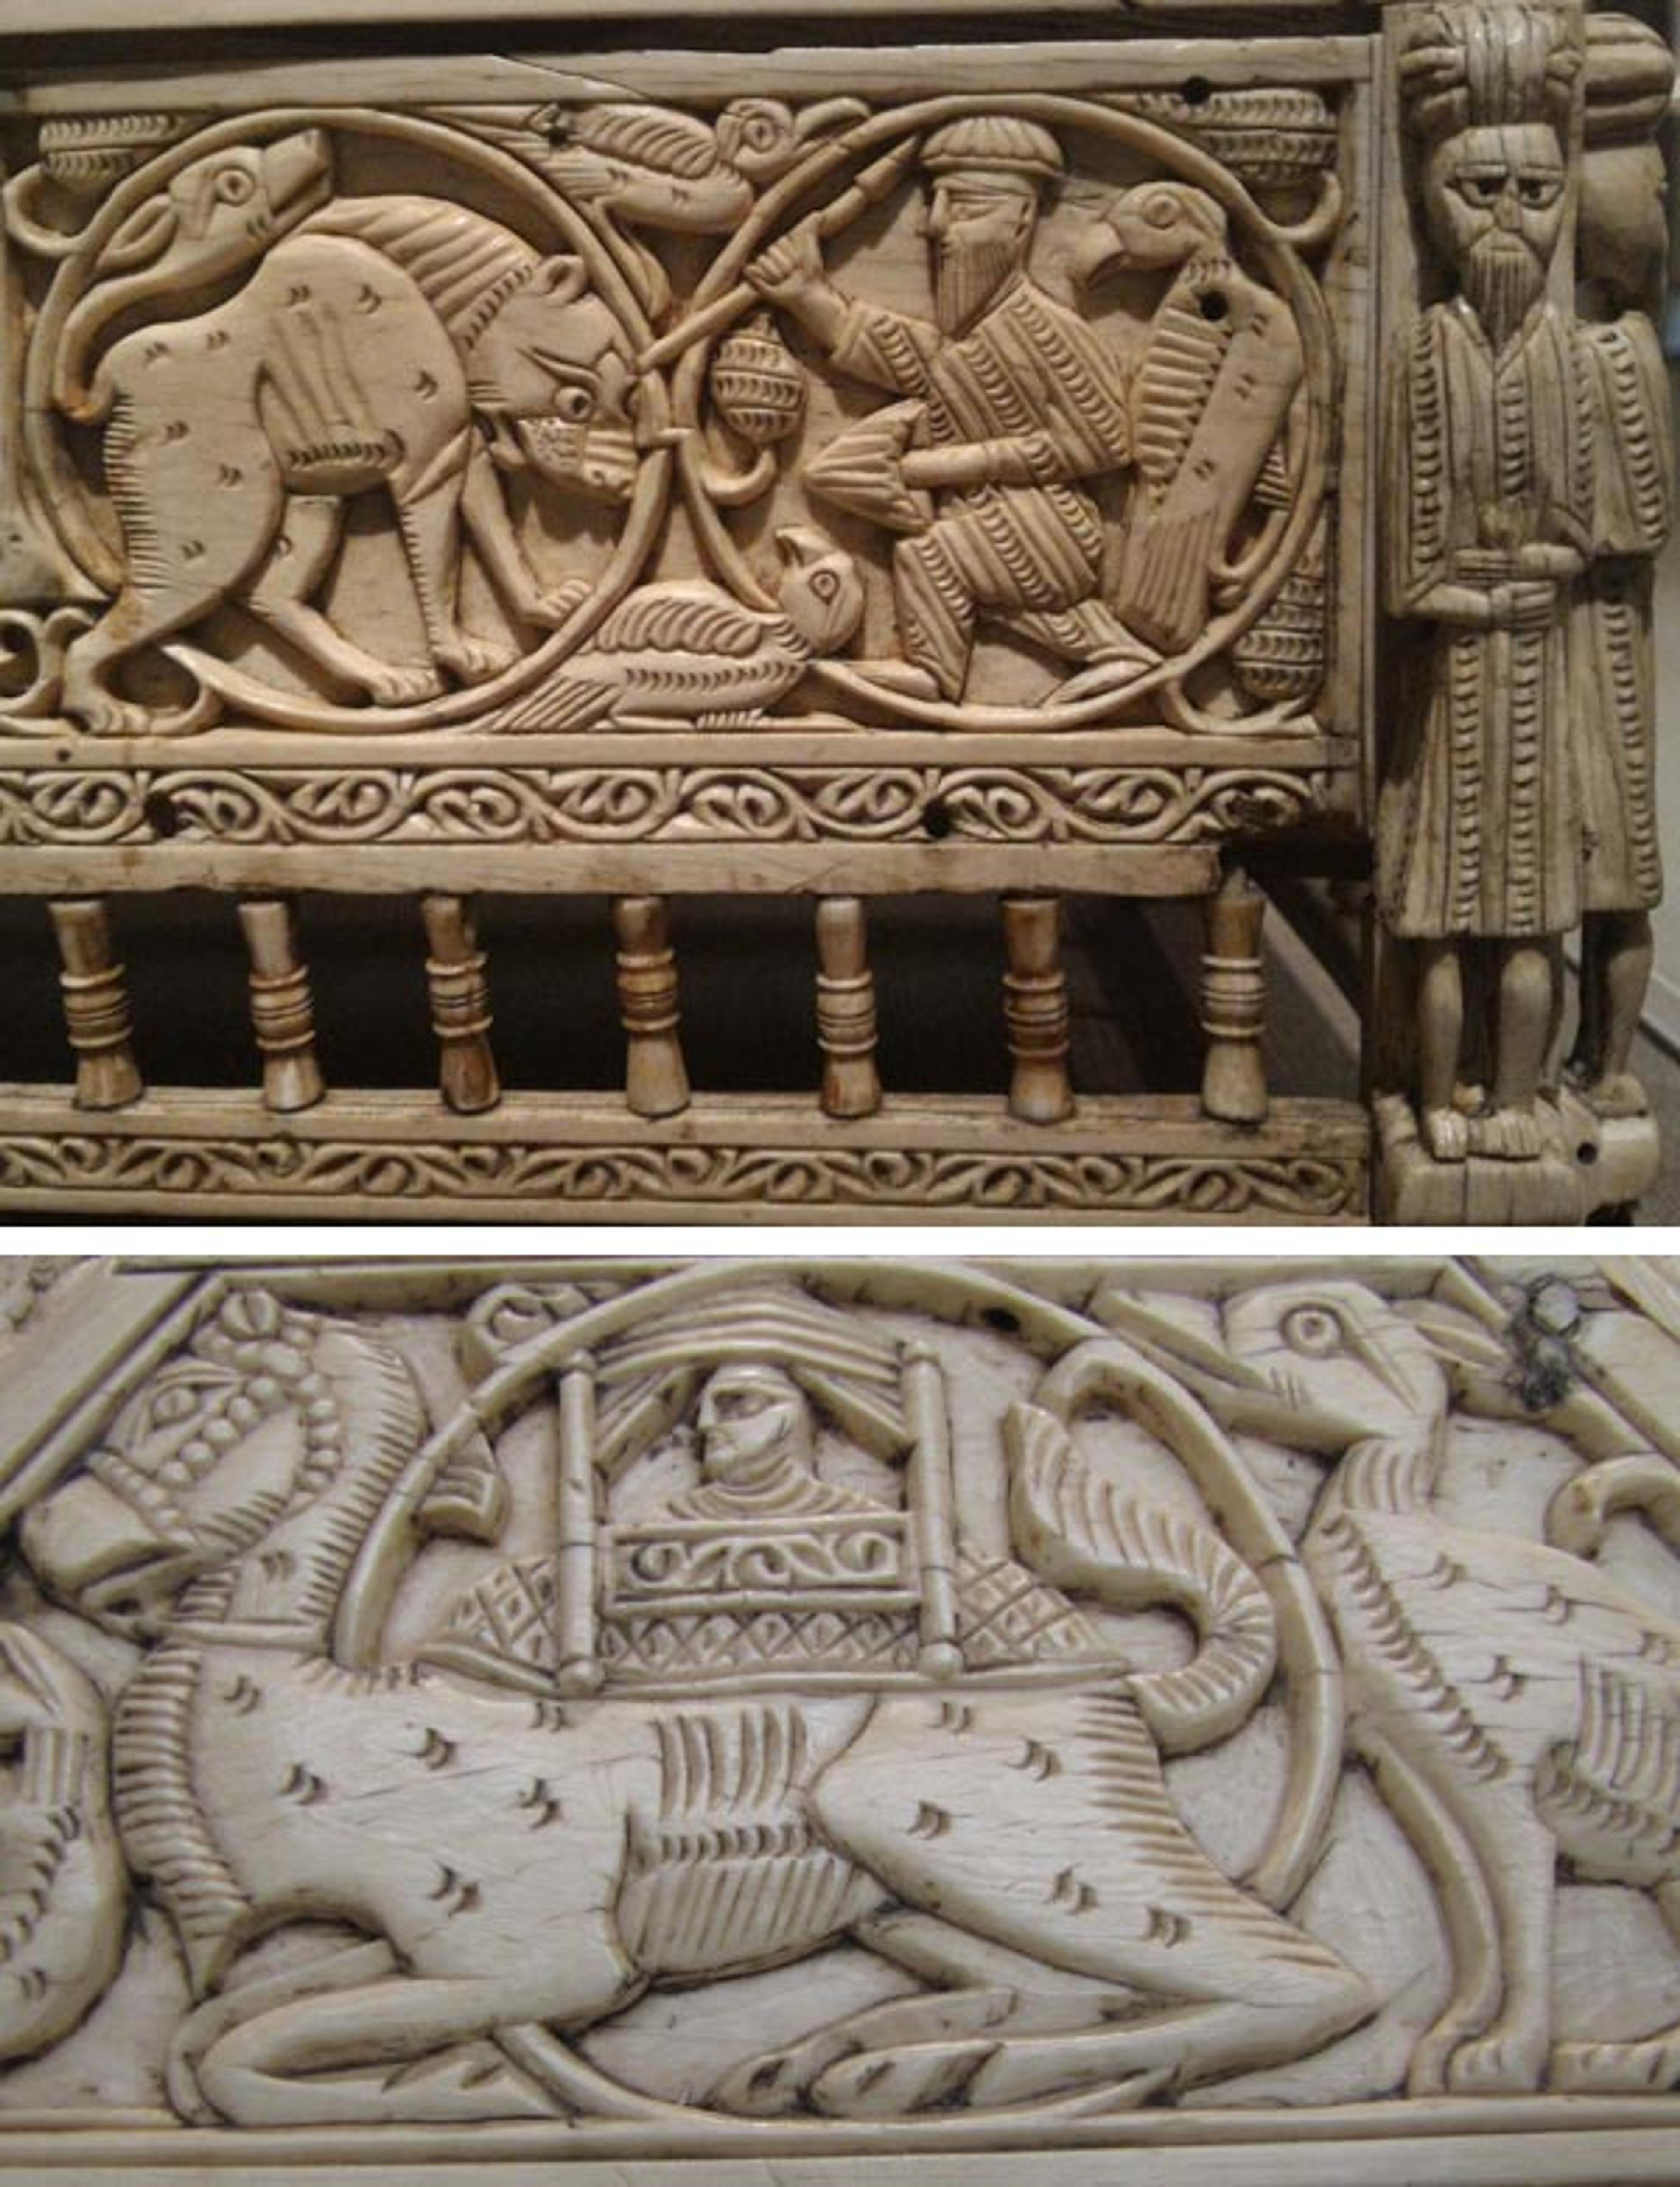 Morgan casket (two detail views), 11th–12th century. Southern Italy. Norman Italy. Ivory; carved; Overall: H. 8 7/8 in. (22.3 cm), W. 15 3/16 in. (38.6 cm), D. 7 7/8 in. (20 cm). The Metropolitan Museum of Art, New York, Gift of J. Pierpont Morgan, 1917 (17.190.241). Photos by Silvia Armando